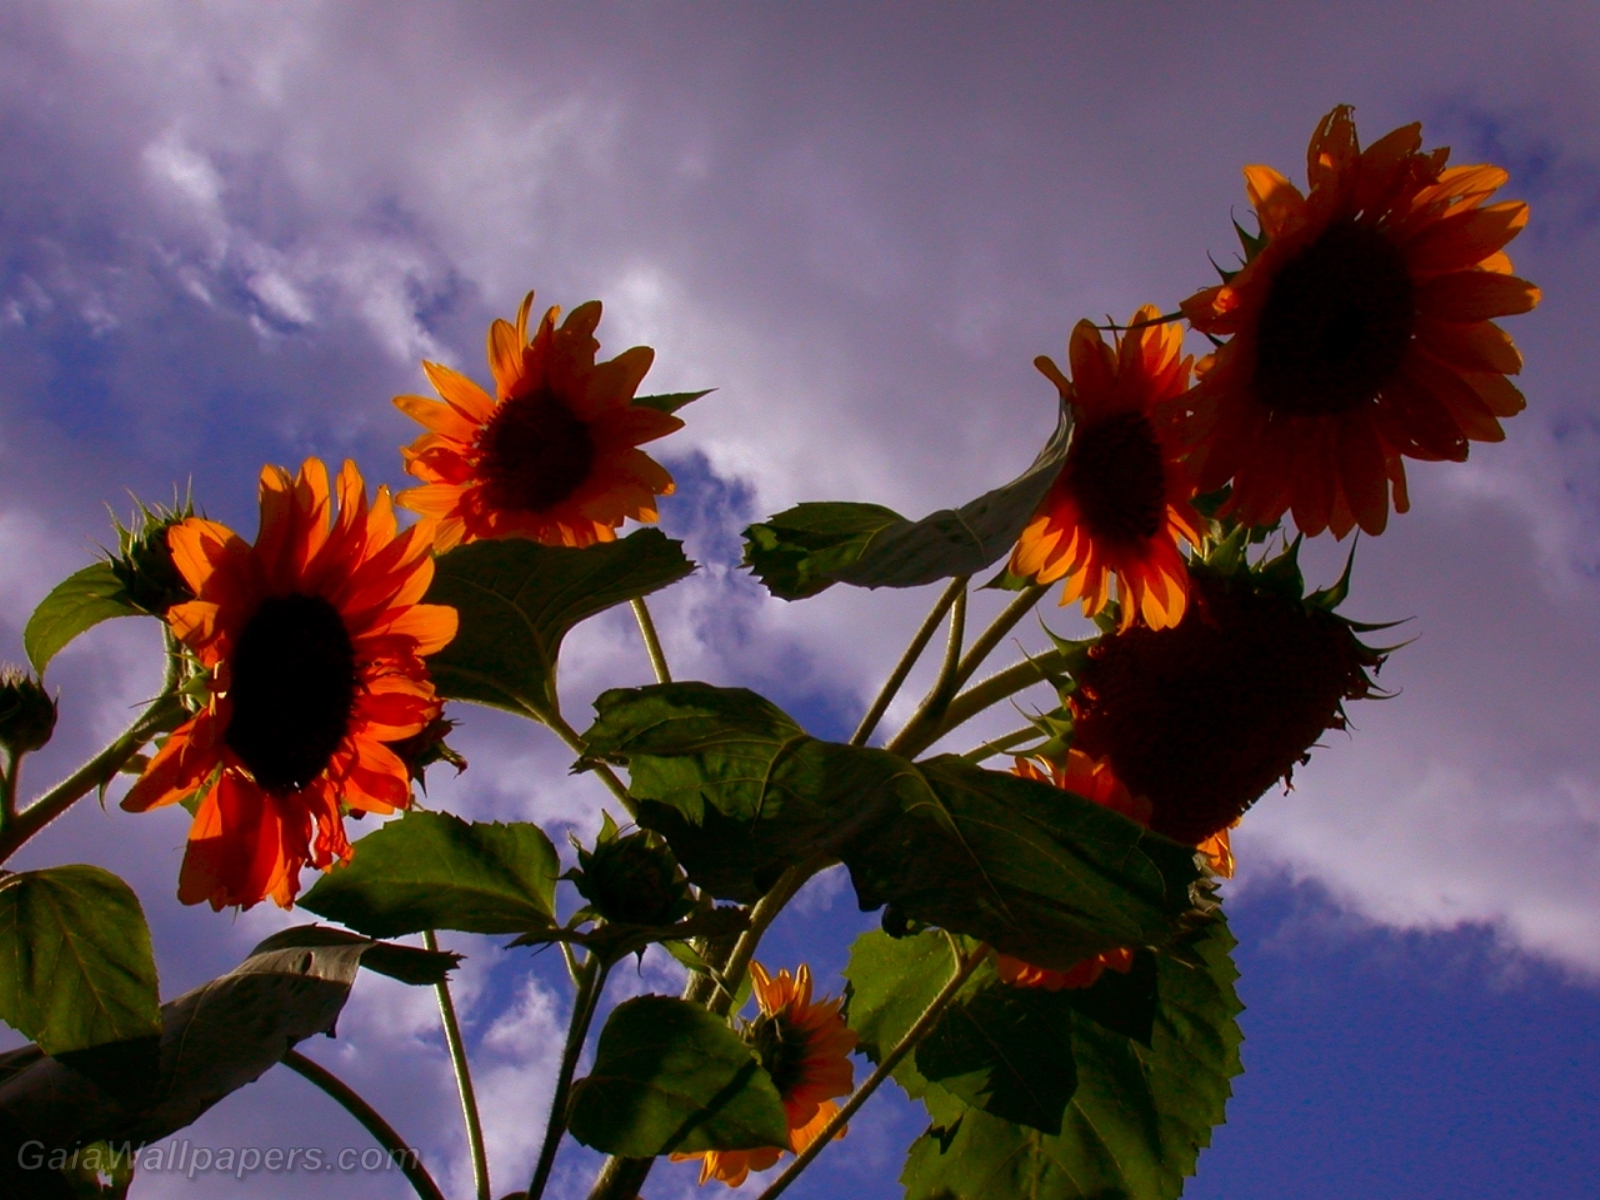 Sunflower with many flowers at sunset - Free desktop wallpapers